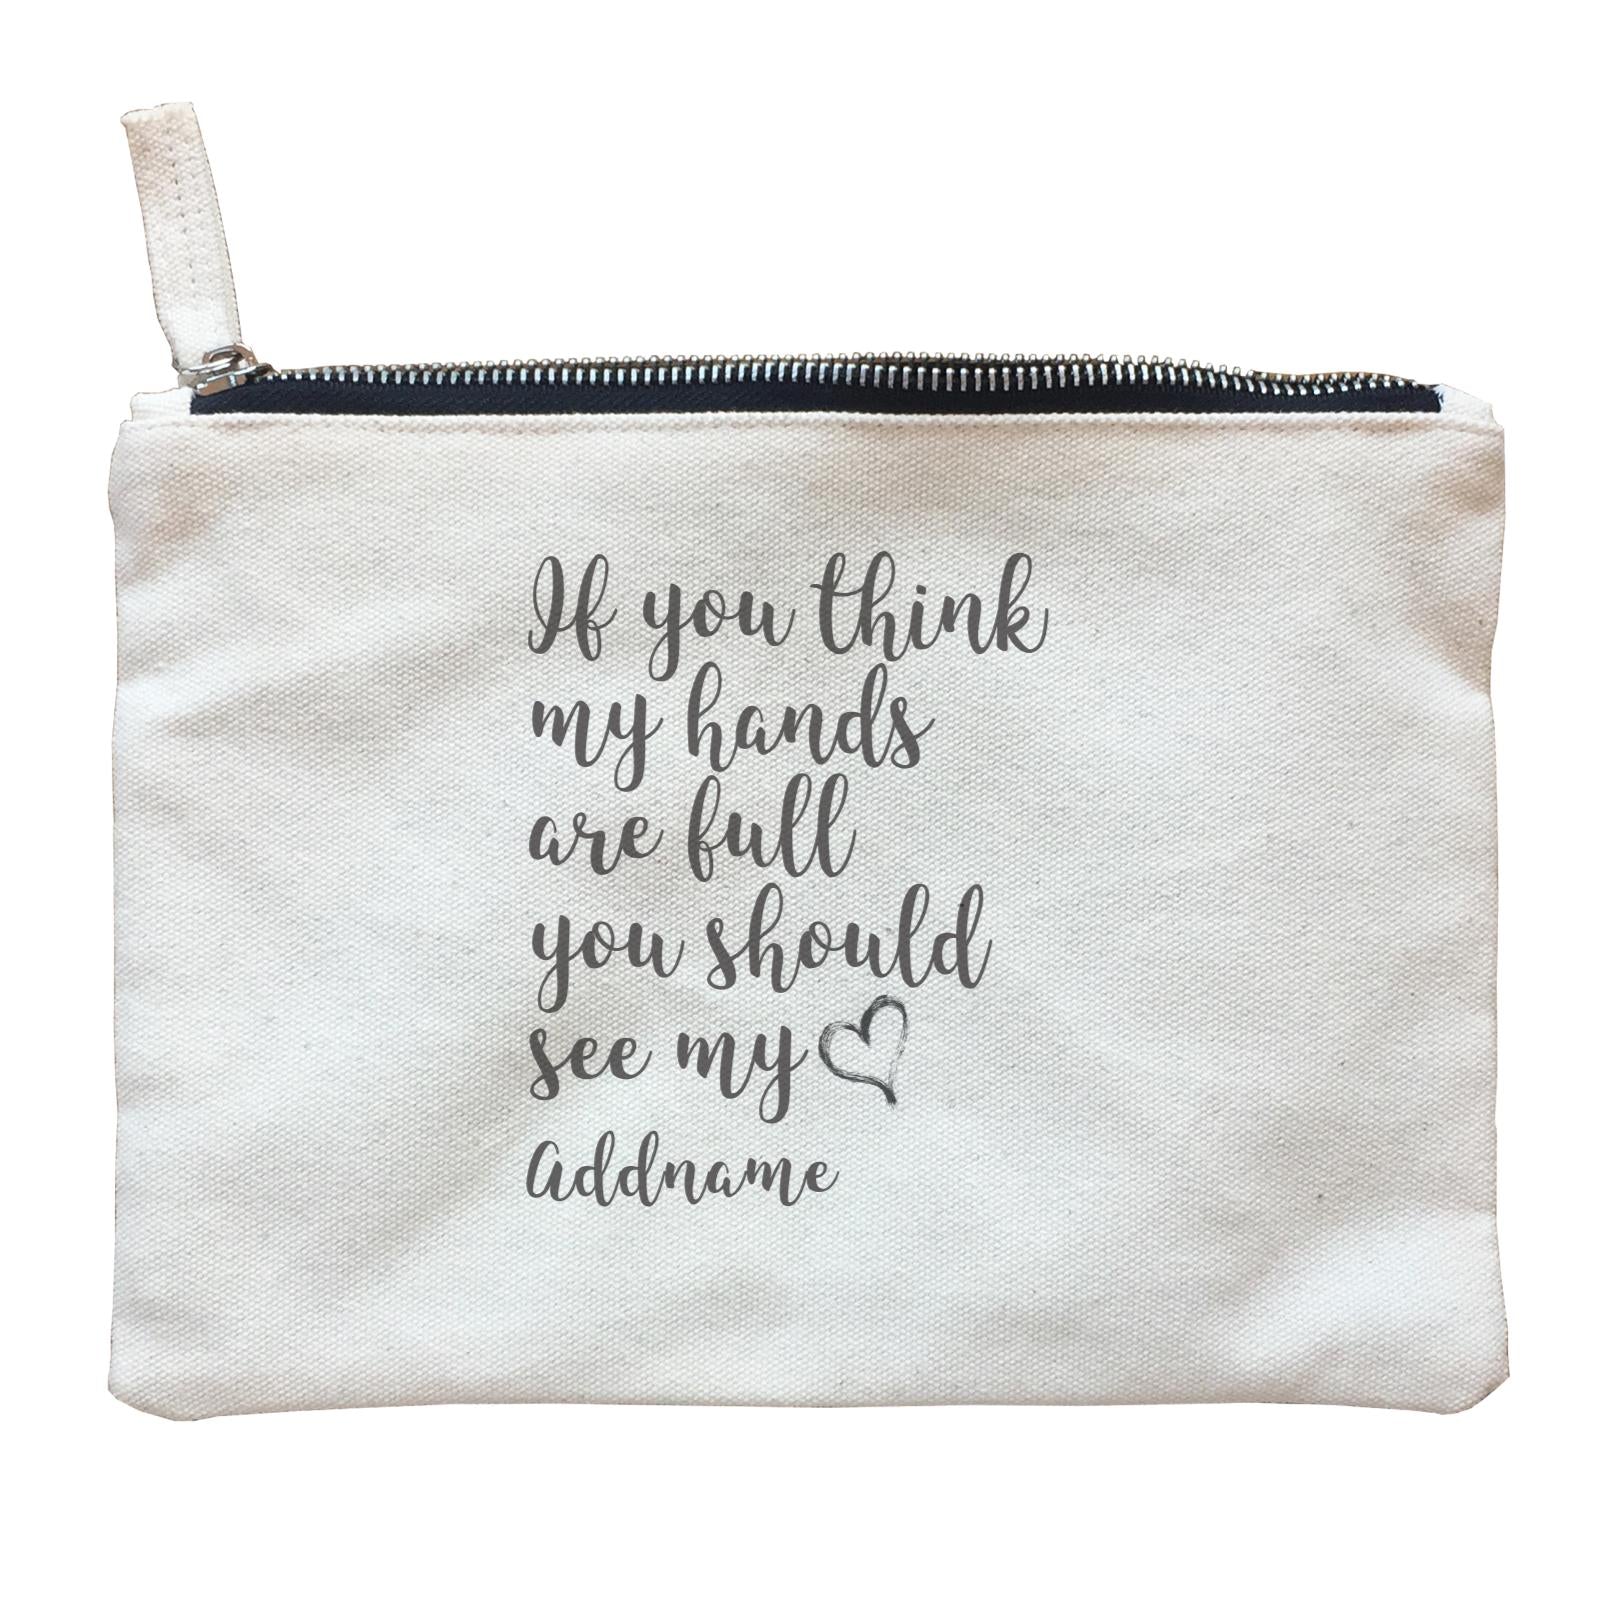 Family Is Everythings Quotes It You Think My Hands Are Full You Should See My Love Addname Zipper Pouch